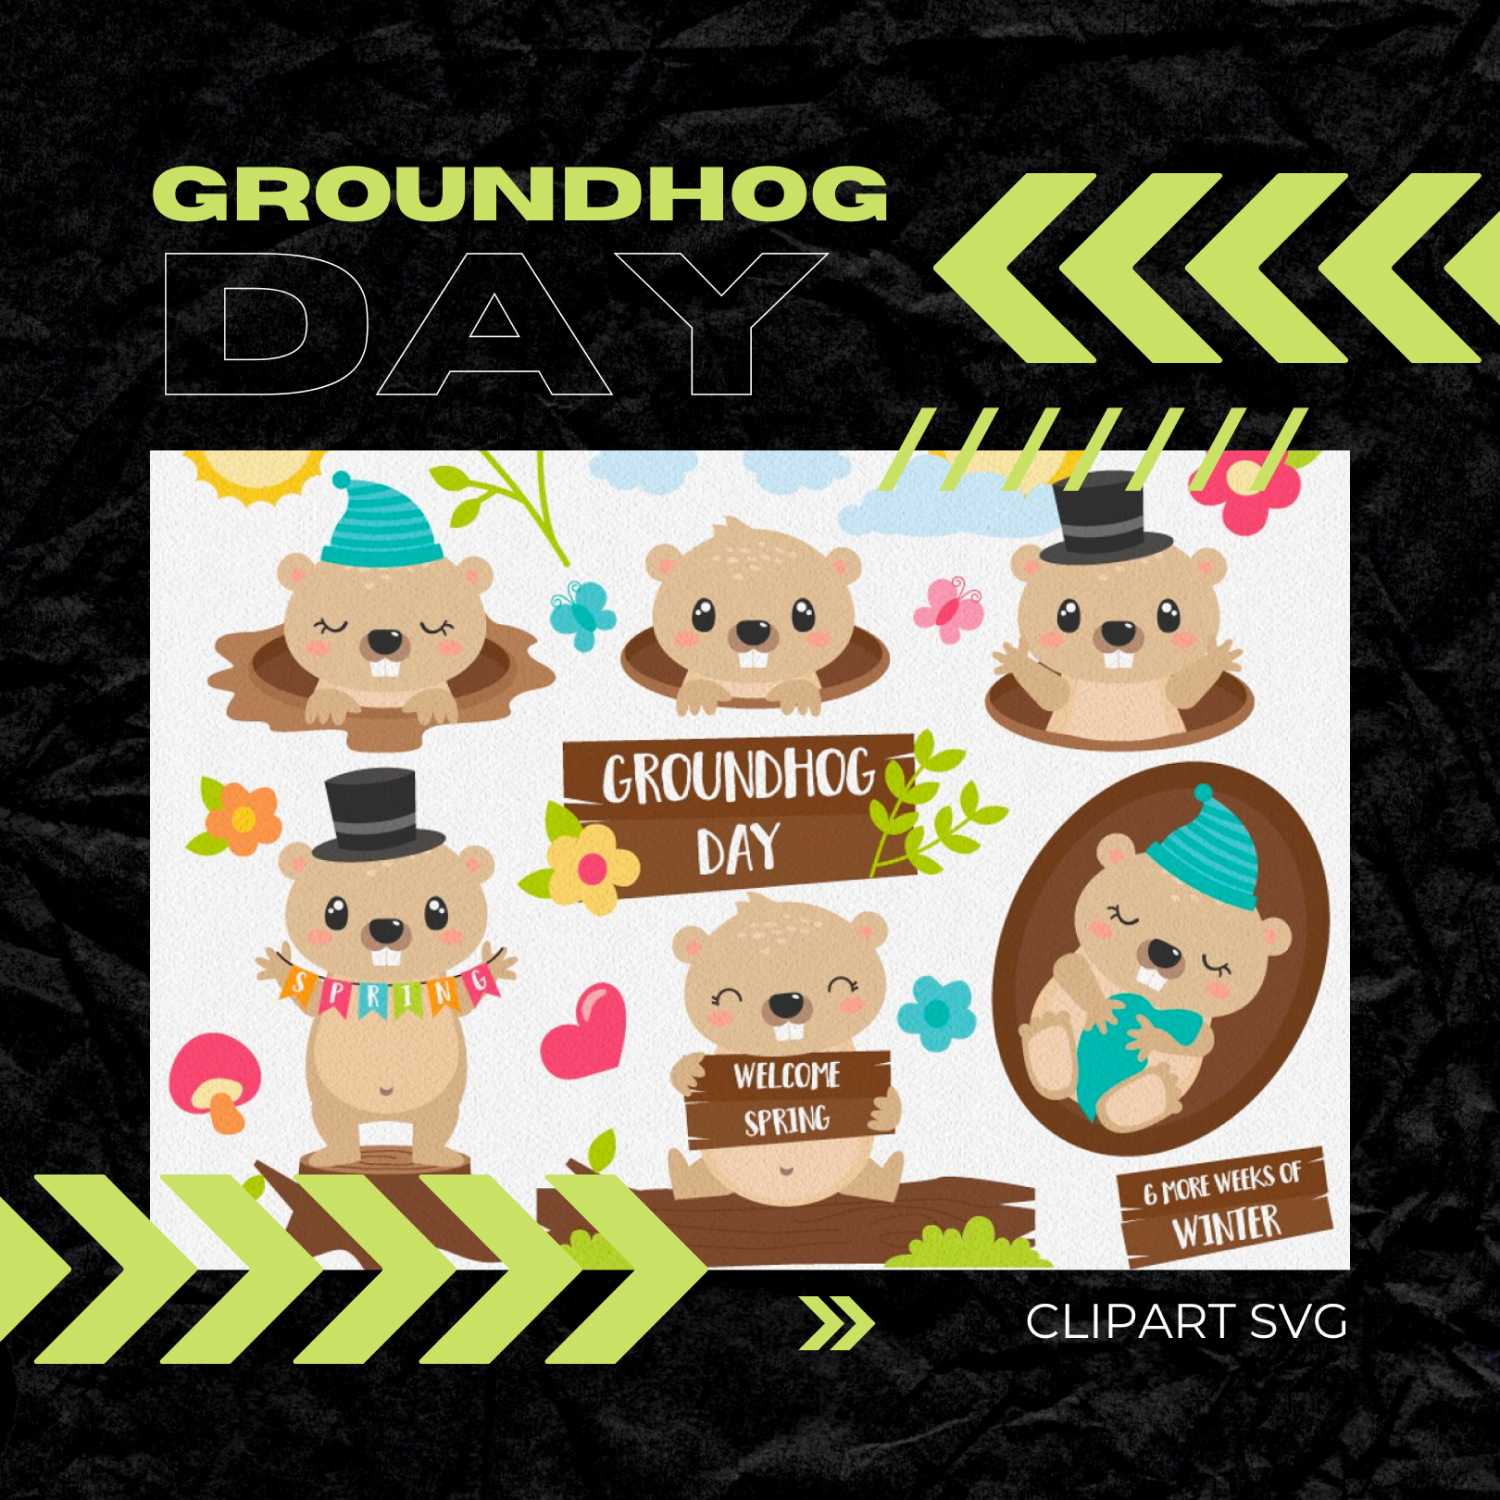 groundhog day 2022 clipart